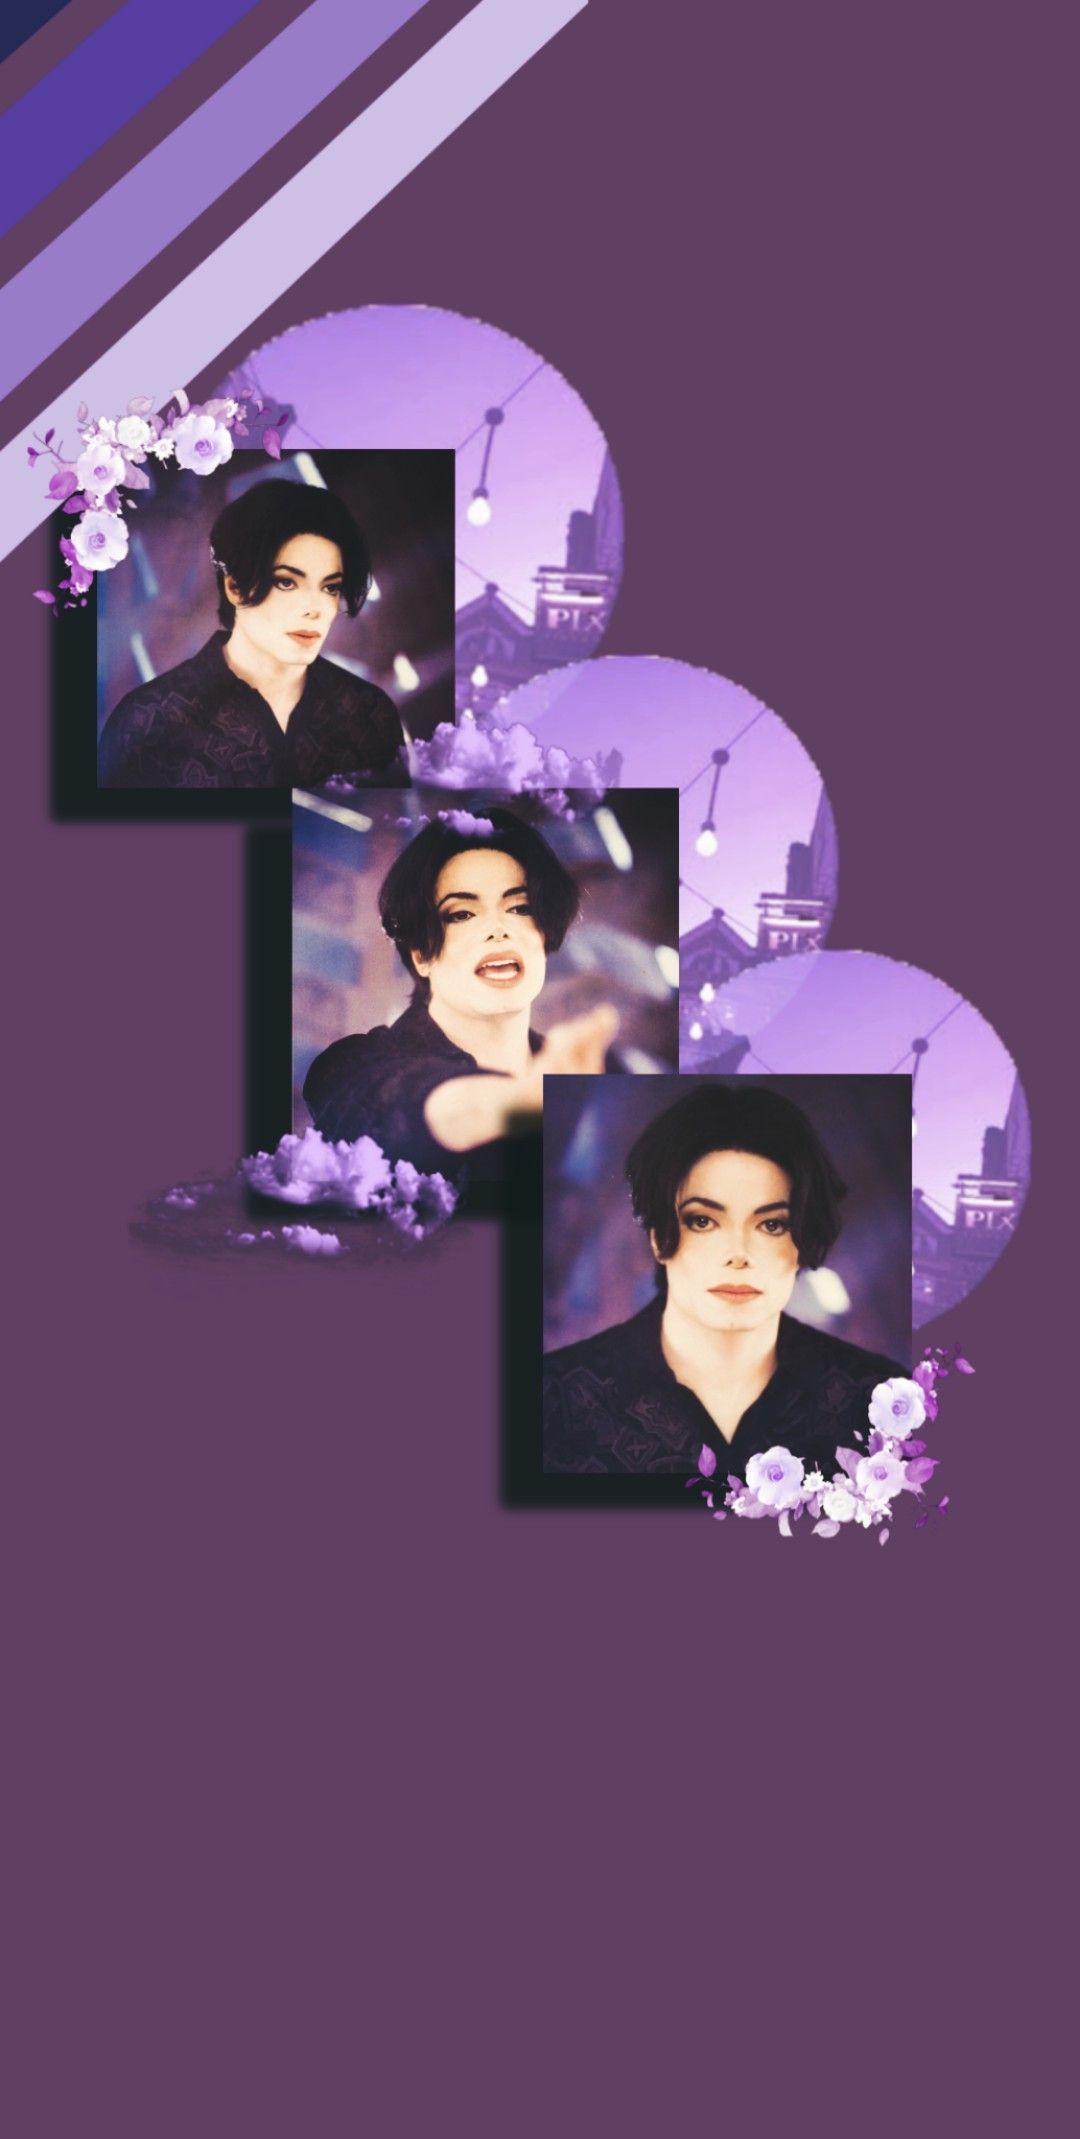 The One and Only Michael Jackson. Michael jackson wallpaper, Micheal jackson, Michael jackson